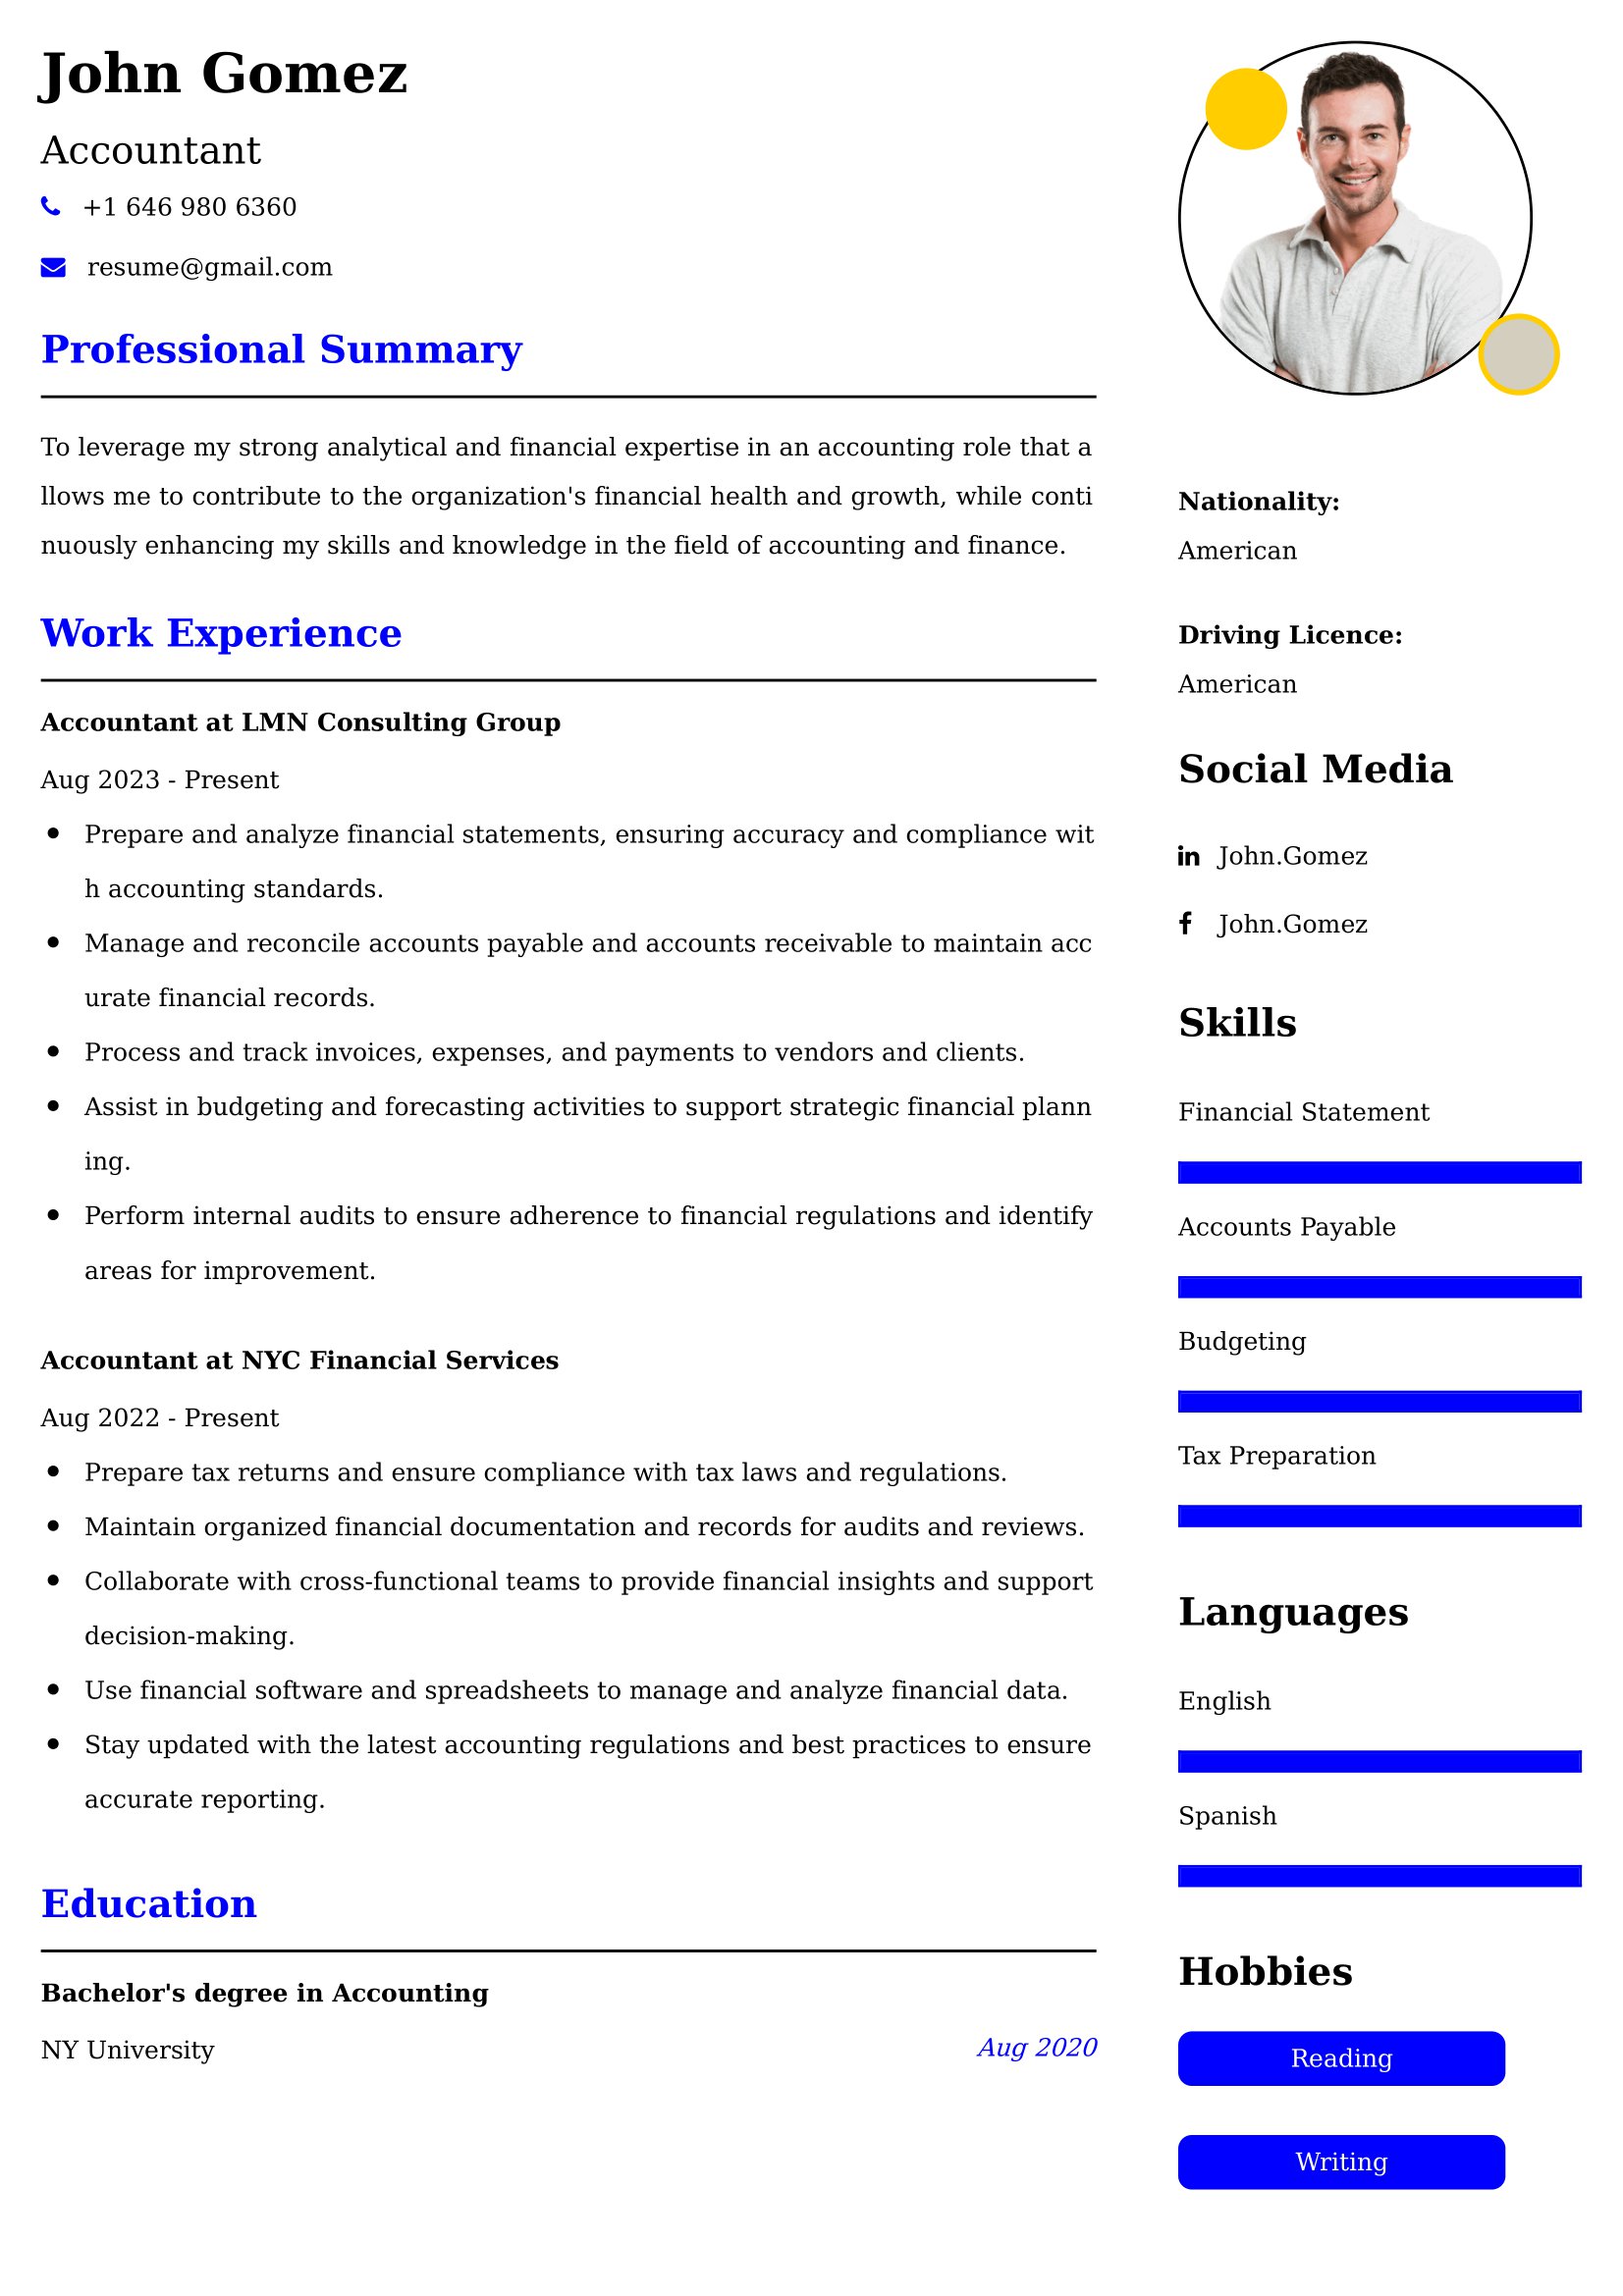 Accountant Resume Examples for UK Jobs - Tips and Guide